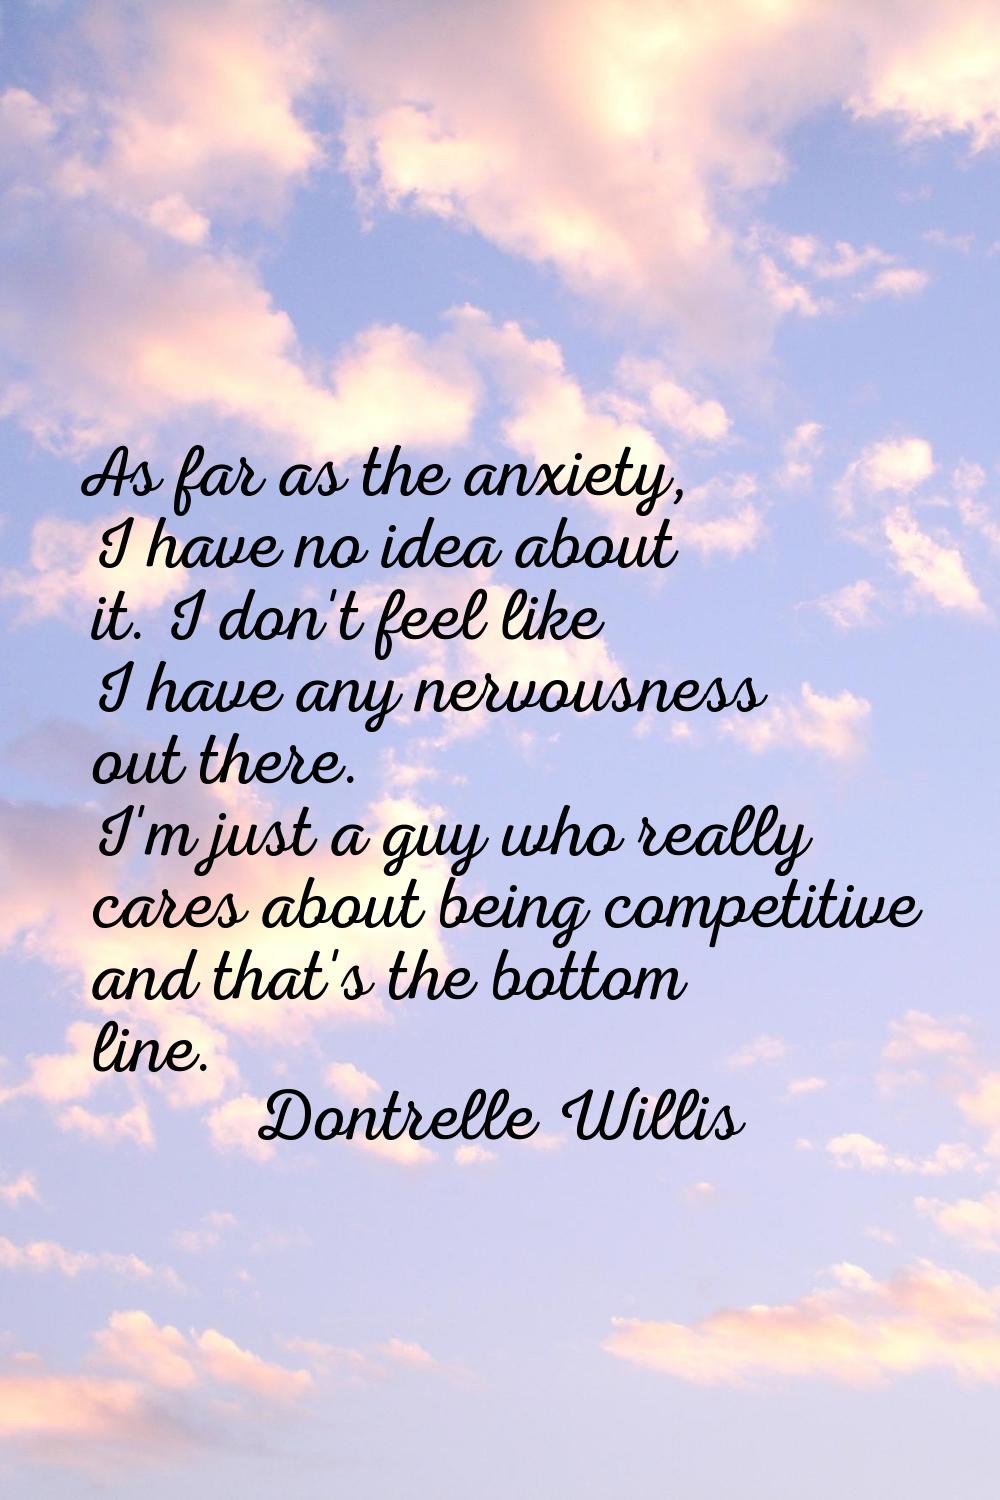 As far as the anxiety, I have no idea about it. I don't feel like I have any nervousness out there.